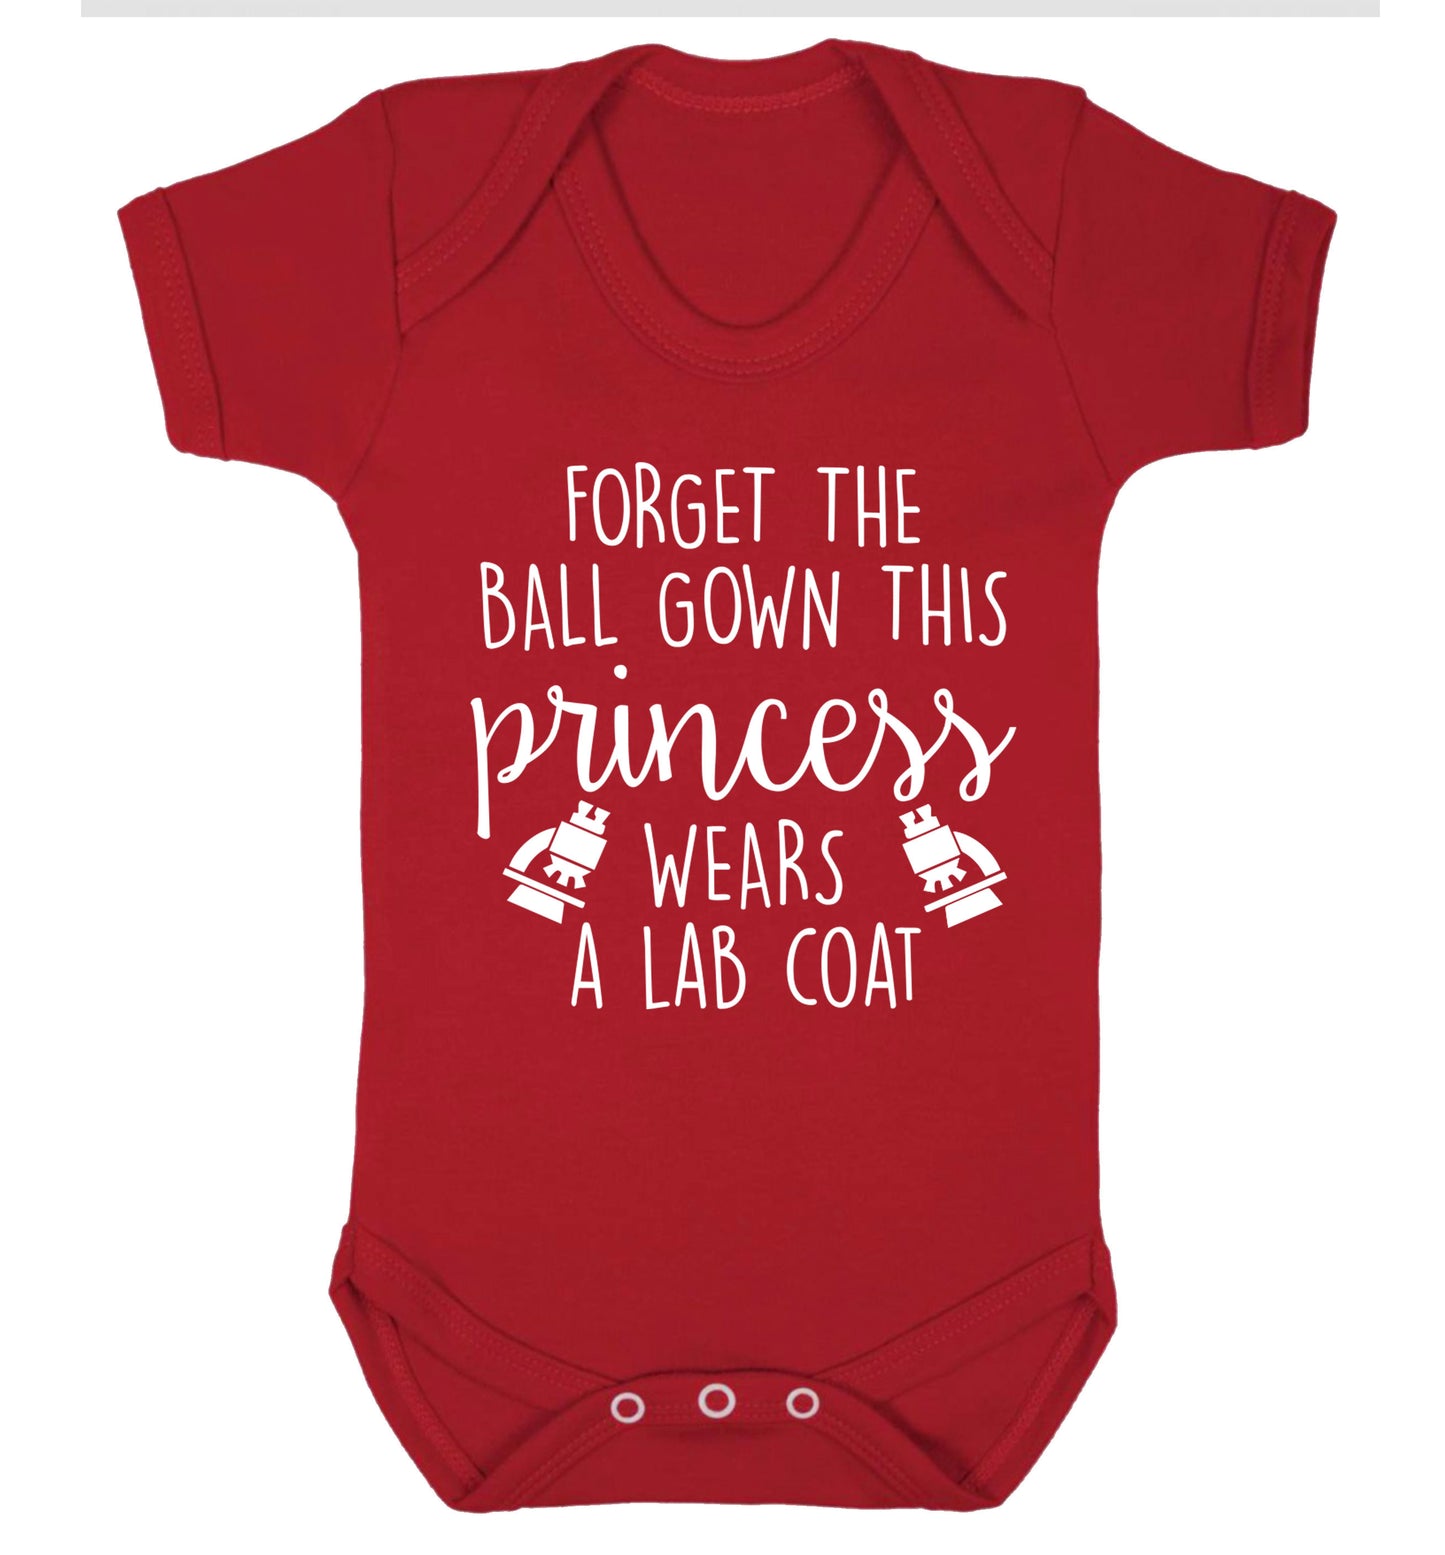 Forget the ball gown this princess wears a lab coat Baby Vest red 18-24 months